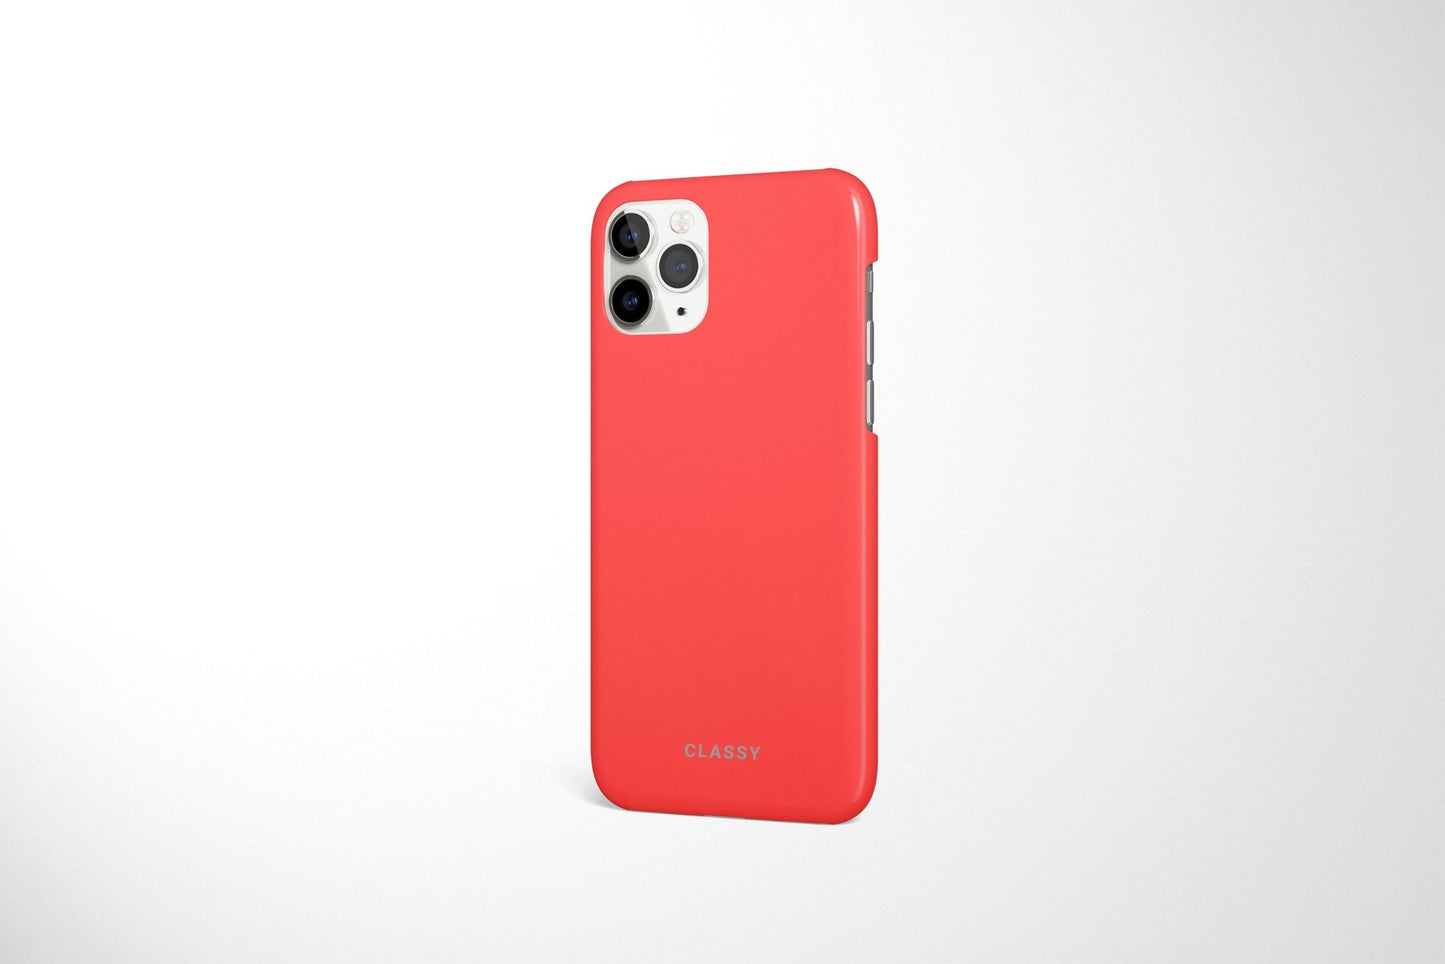 Coral Red Snap Case - Classy Cases - Phone Case - iPhone 12 Pro Max - Glossy -